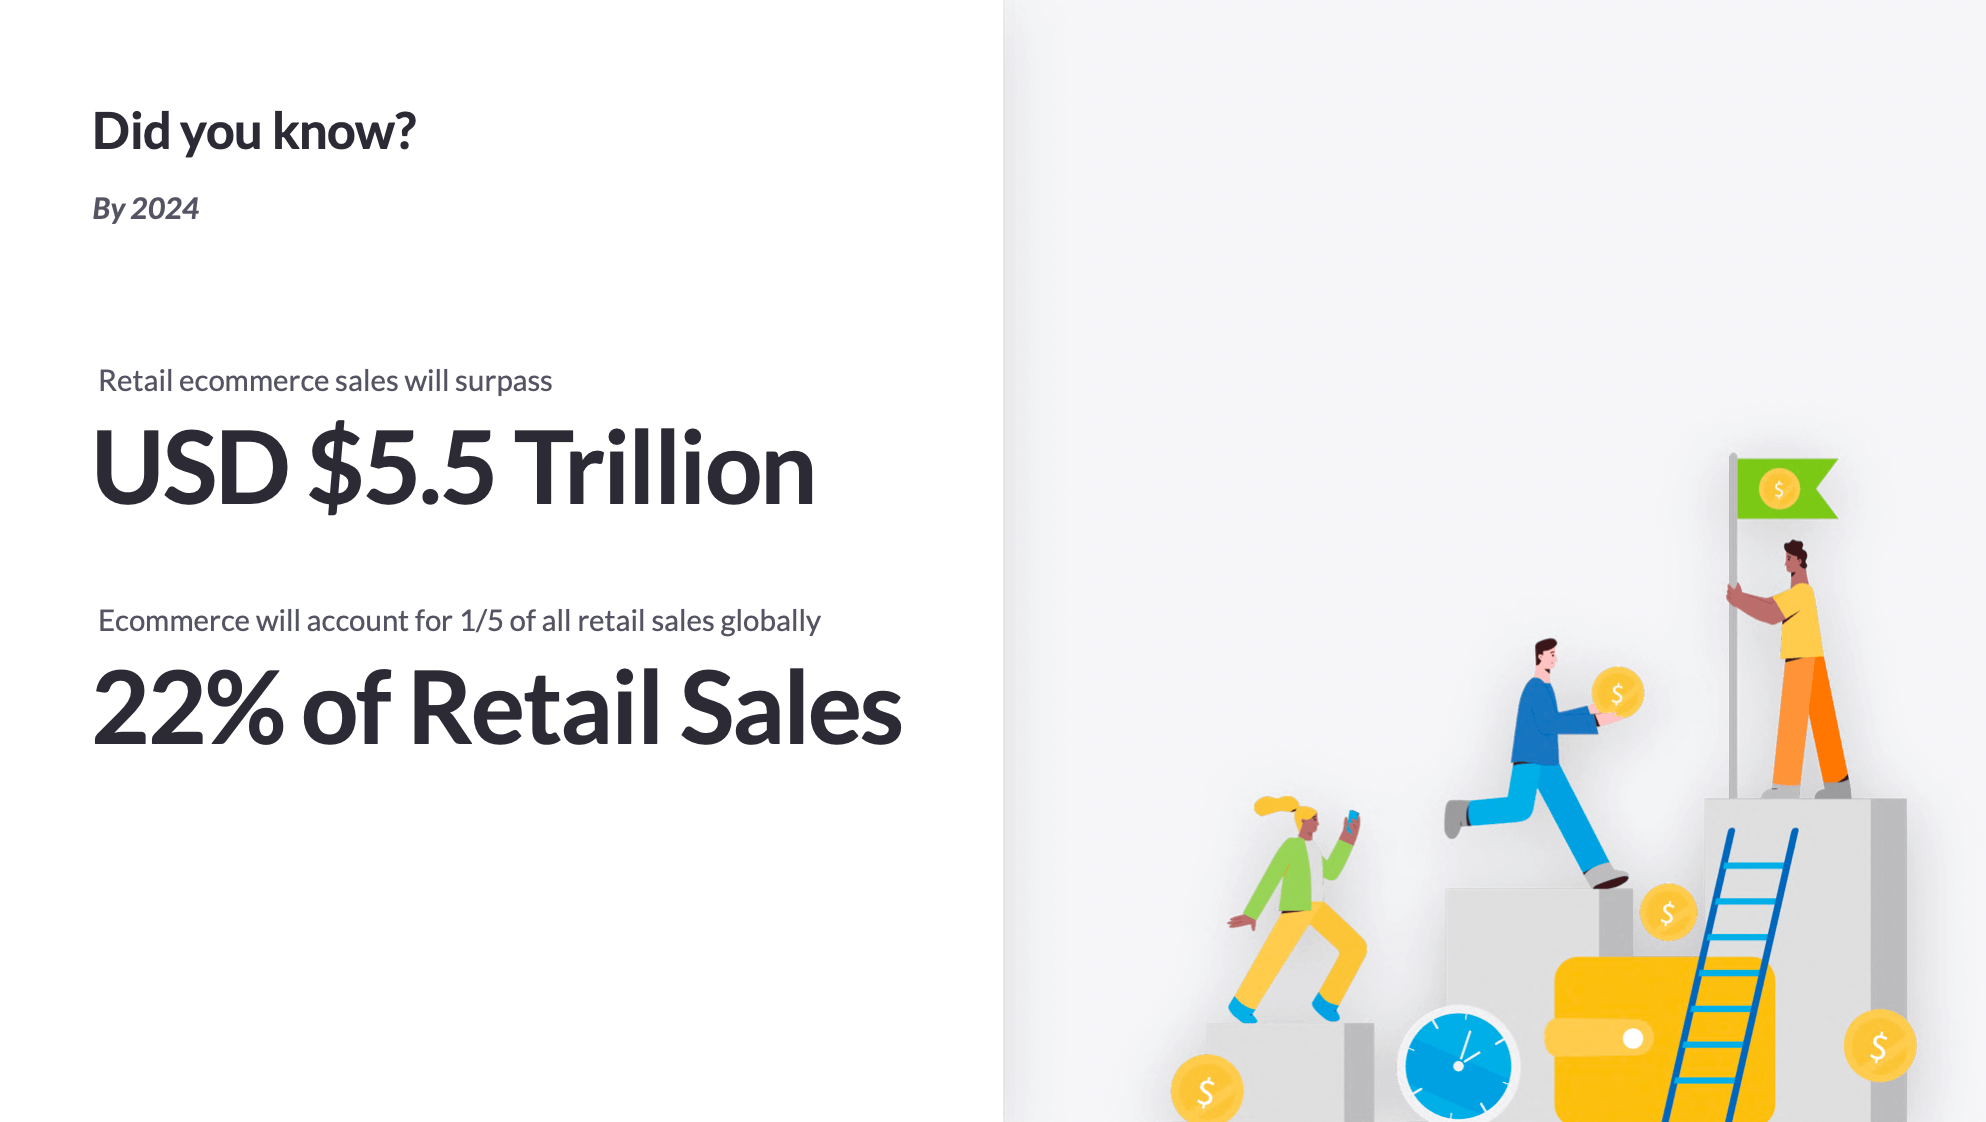 an infograph stating by 2024, retail ecommerce sales will surpass $5.5 trillion USD and account for 22% of retail sales.